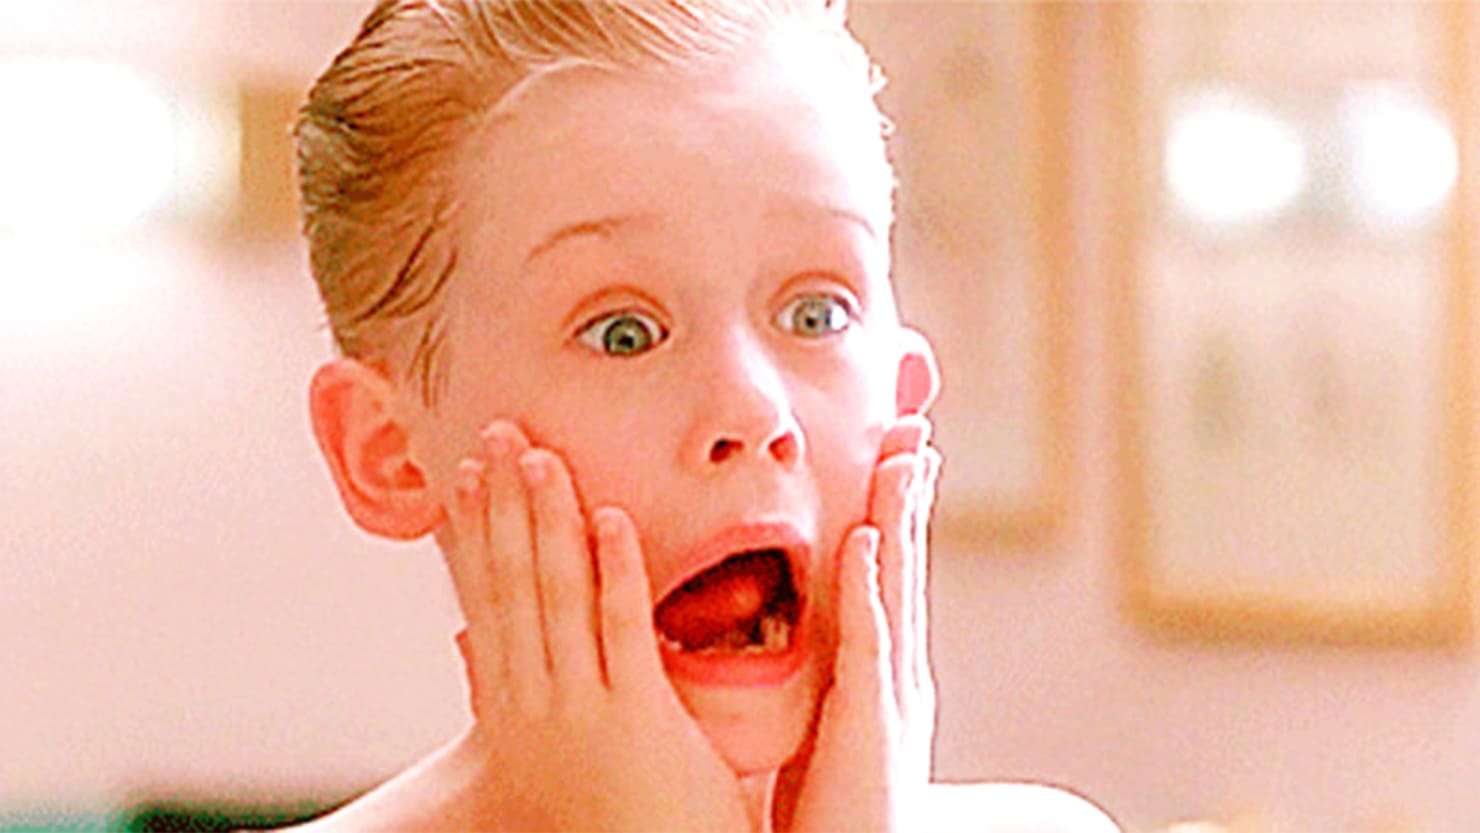 Home Alone – Kevin McAllister puts after shave on